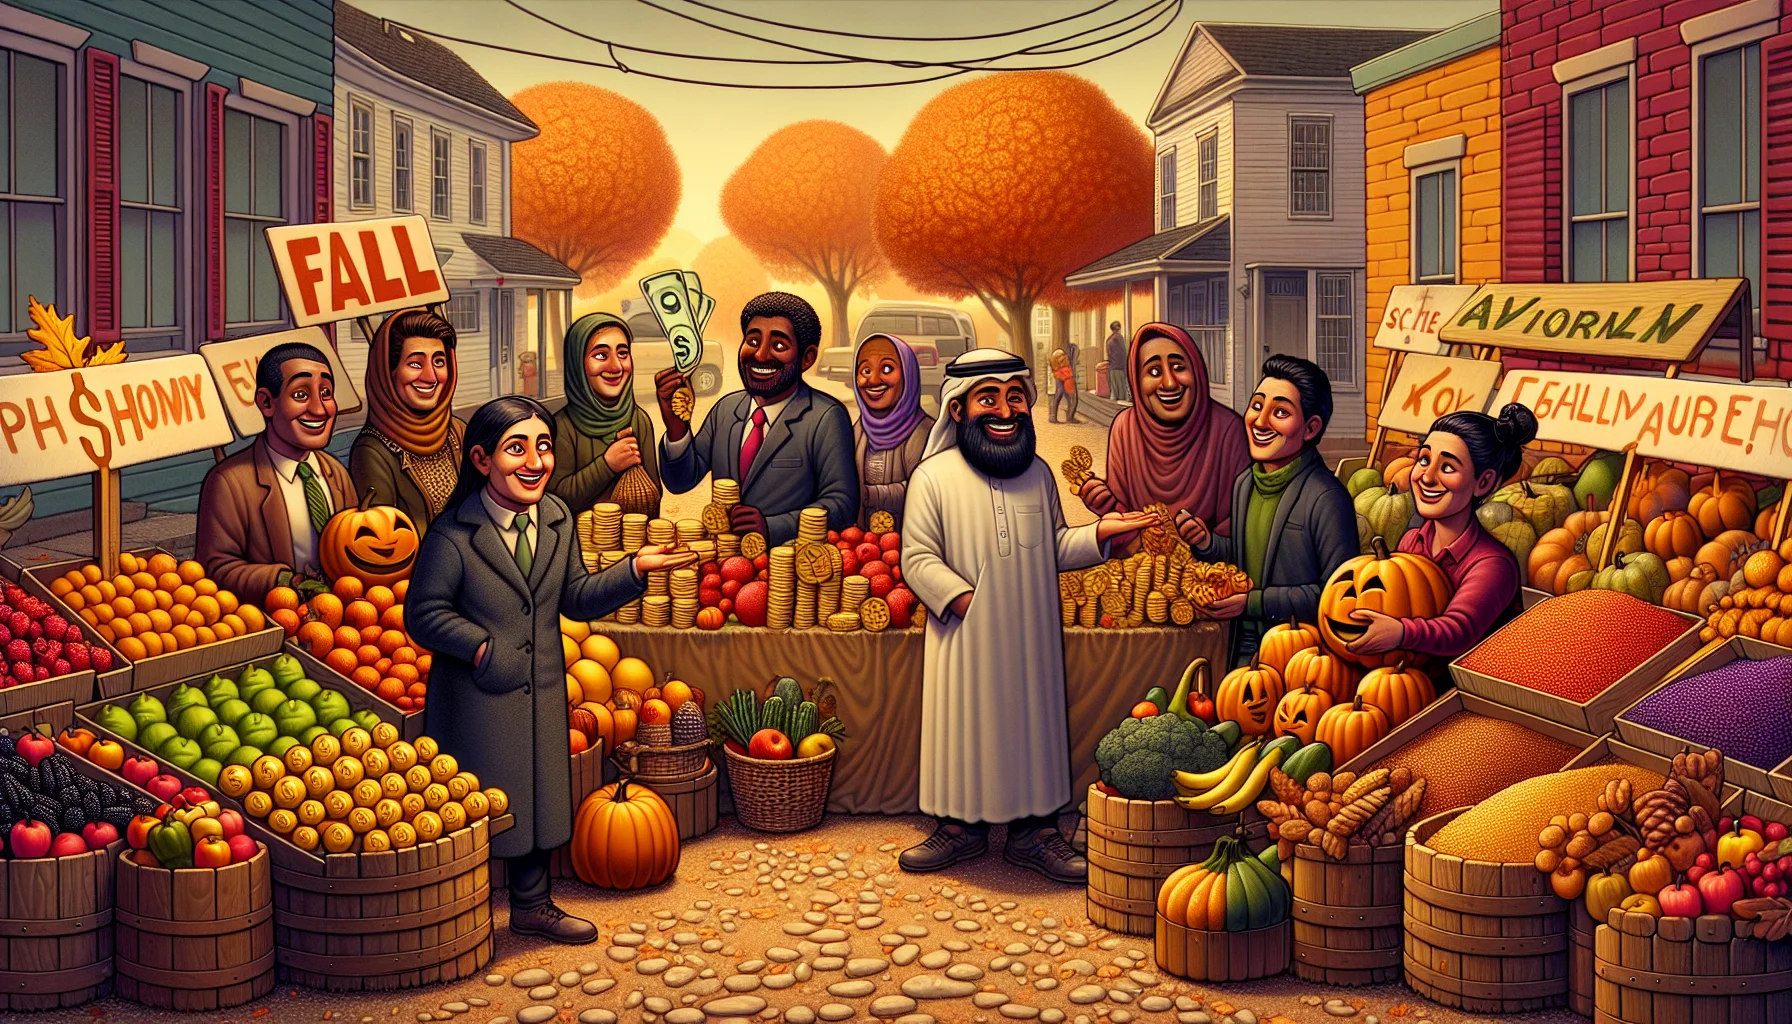 A humorous scene in the setting of a Fall Fest Web Walkabout: A street lined with stalls brimming with vibrant autumn harvest. Cheery stall owners, a Hispanic man and a Middle-Eastern woman, are enticing passersby, a balanced group of Caucasian, Black, and South Asian men and women, with their tempting array of fresh produce sold at bargain prices. The affluent fruits, vegetables, and grains are comically shaped like gold coins and dollar bills, implying the affordability of quality nutrition. Warm hues of the fall season add to the festive, inviting atmosphere.